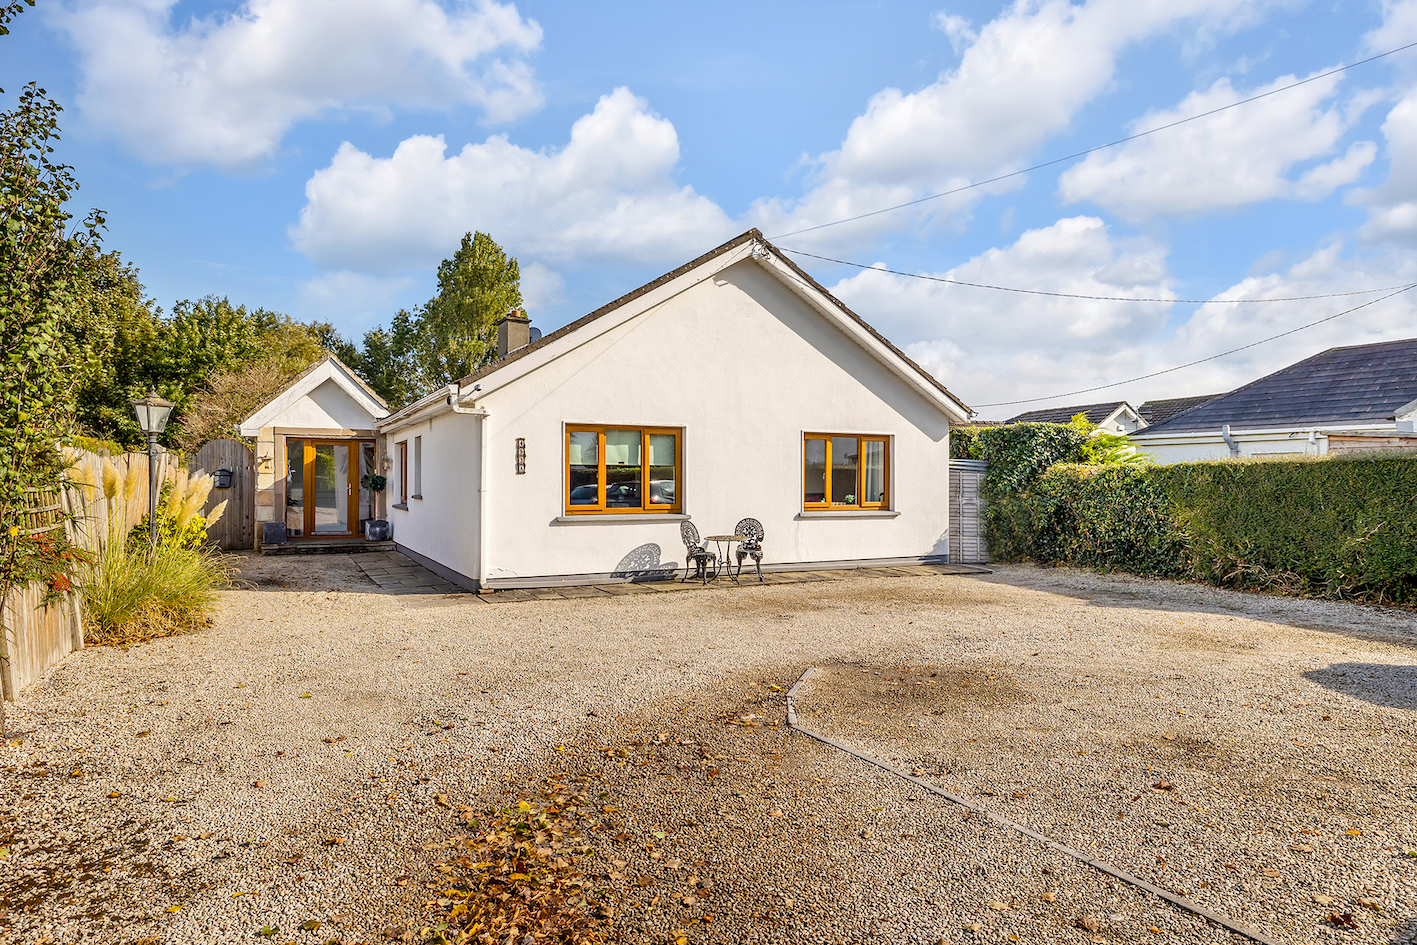 493A Mariaville, Moyglare Road , Maynooth, Co. Kildare, W23 R7D5